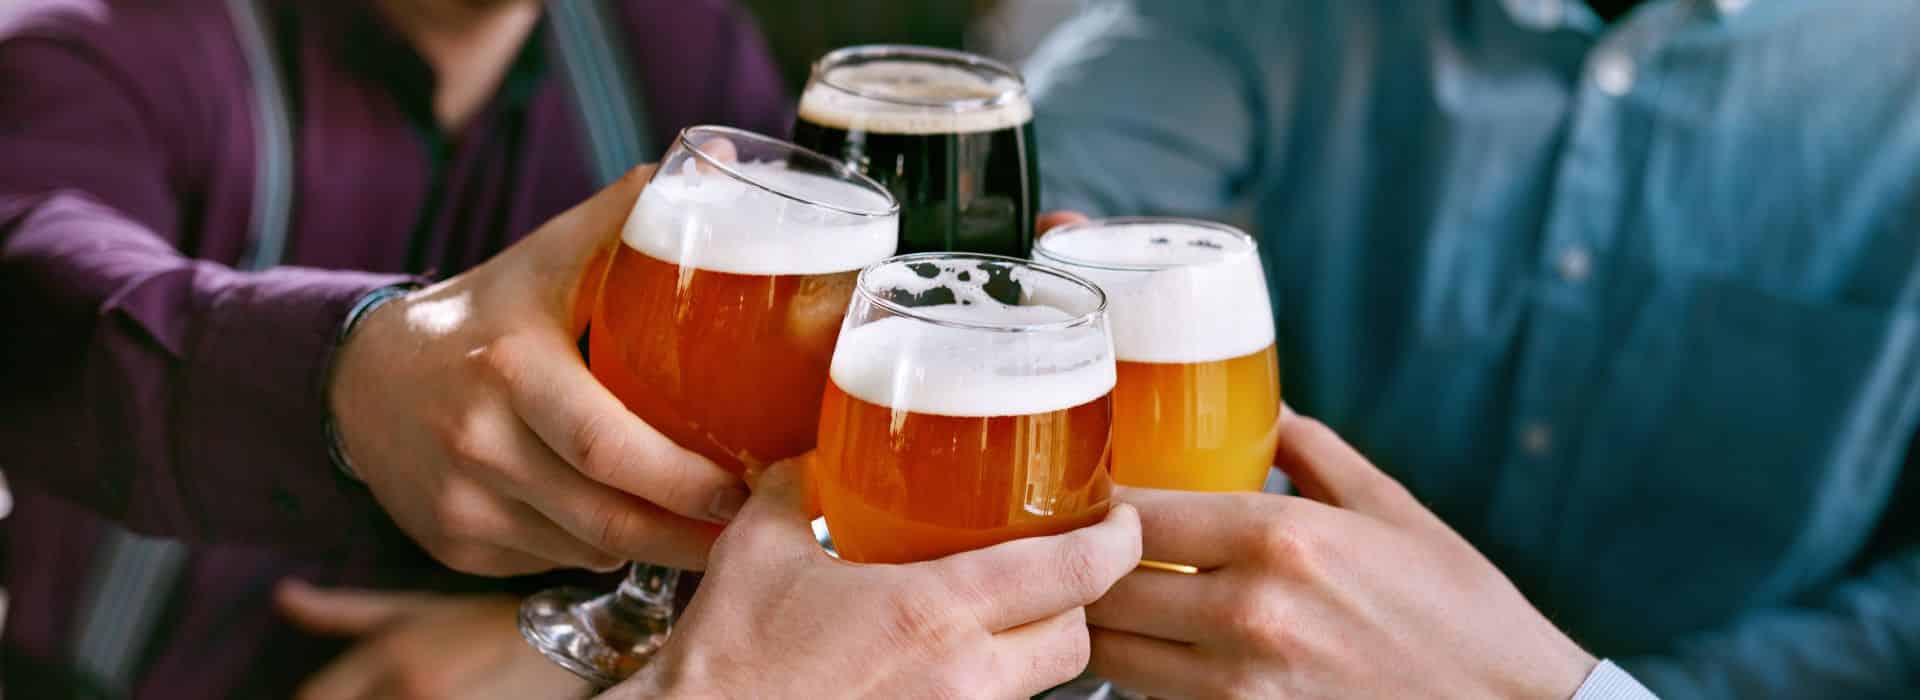 Four hands raising and clinking beer glasses